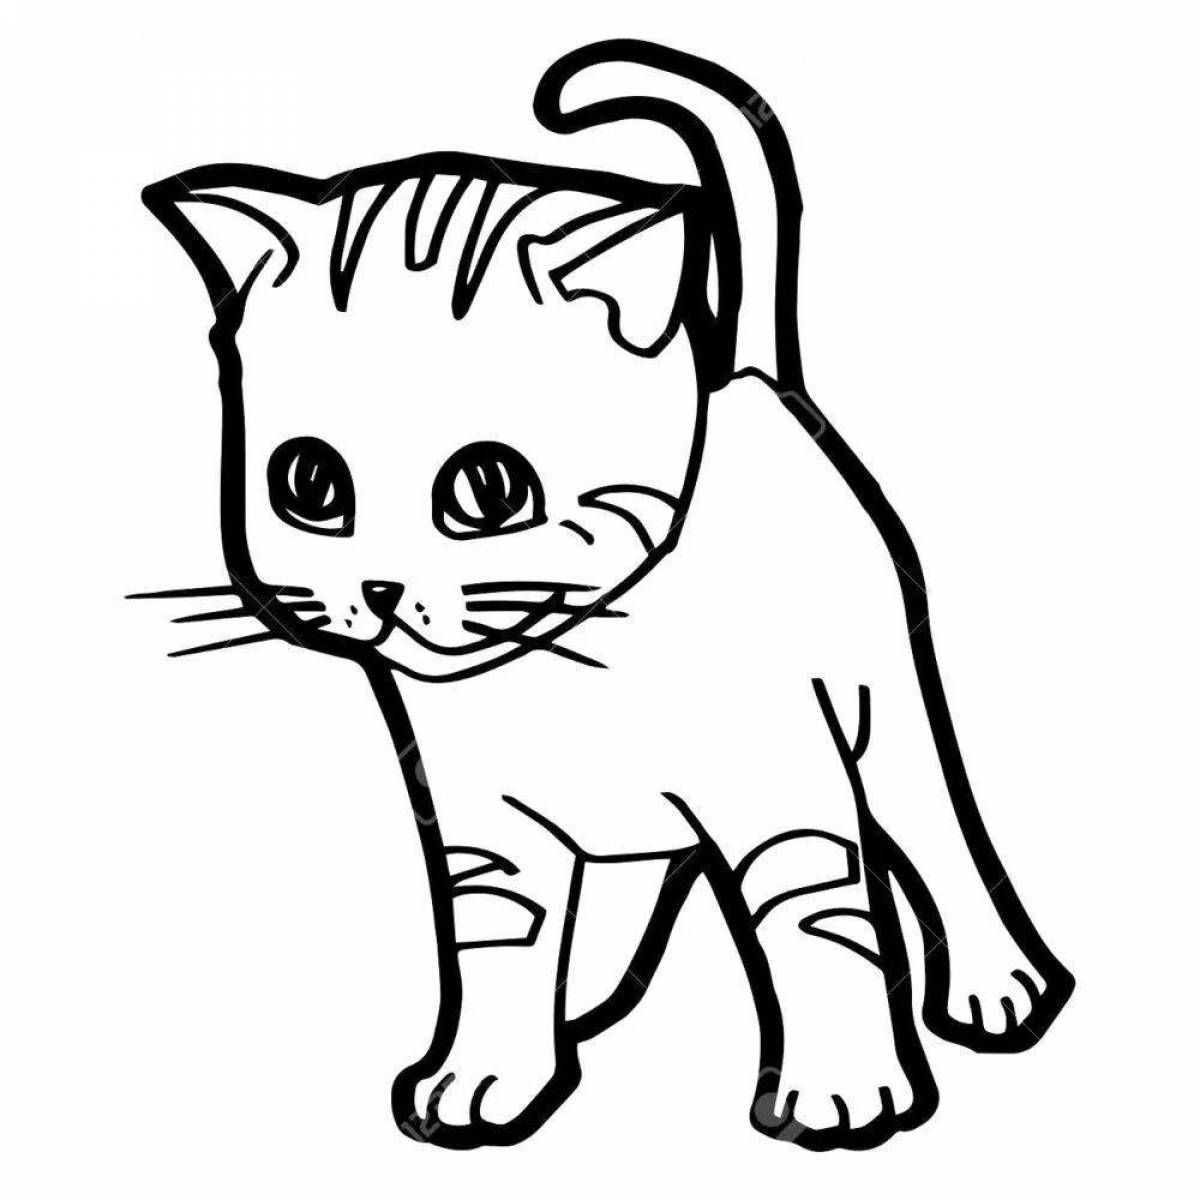 Playful kitten coloring for kids